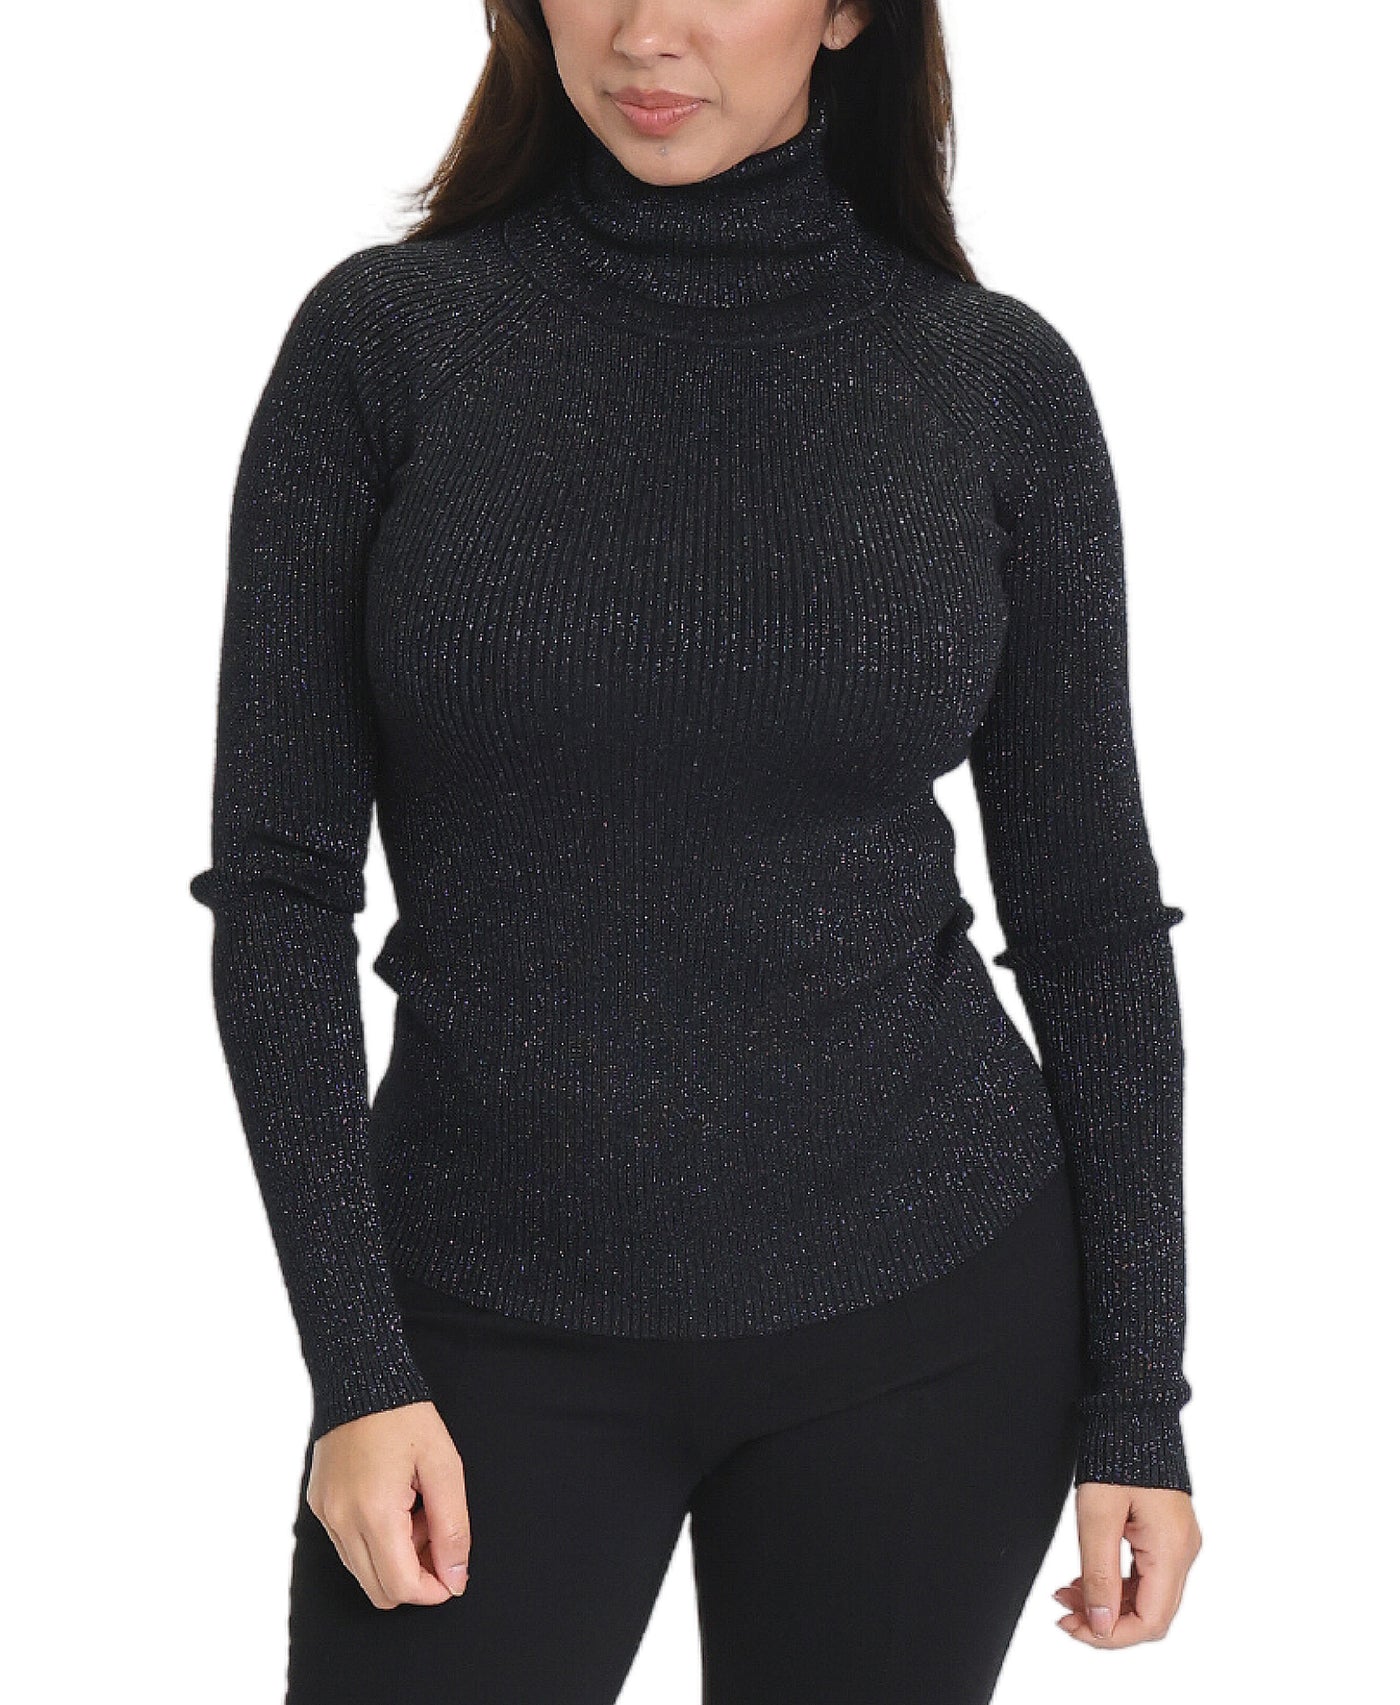 Ribbed Shimmer Sweater image 1